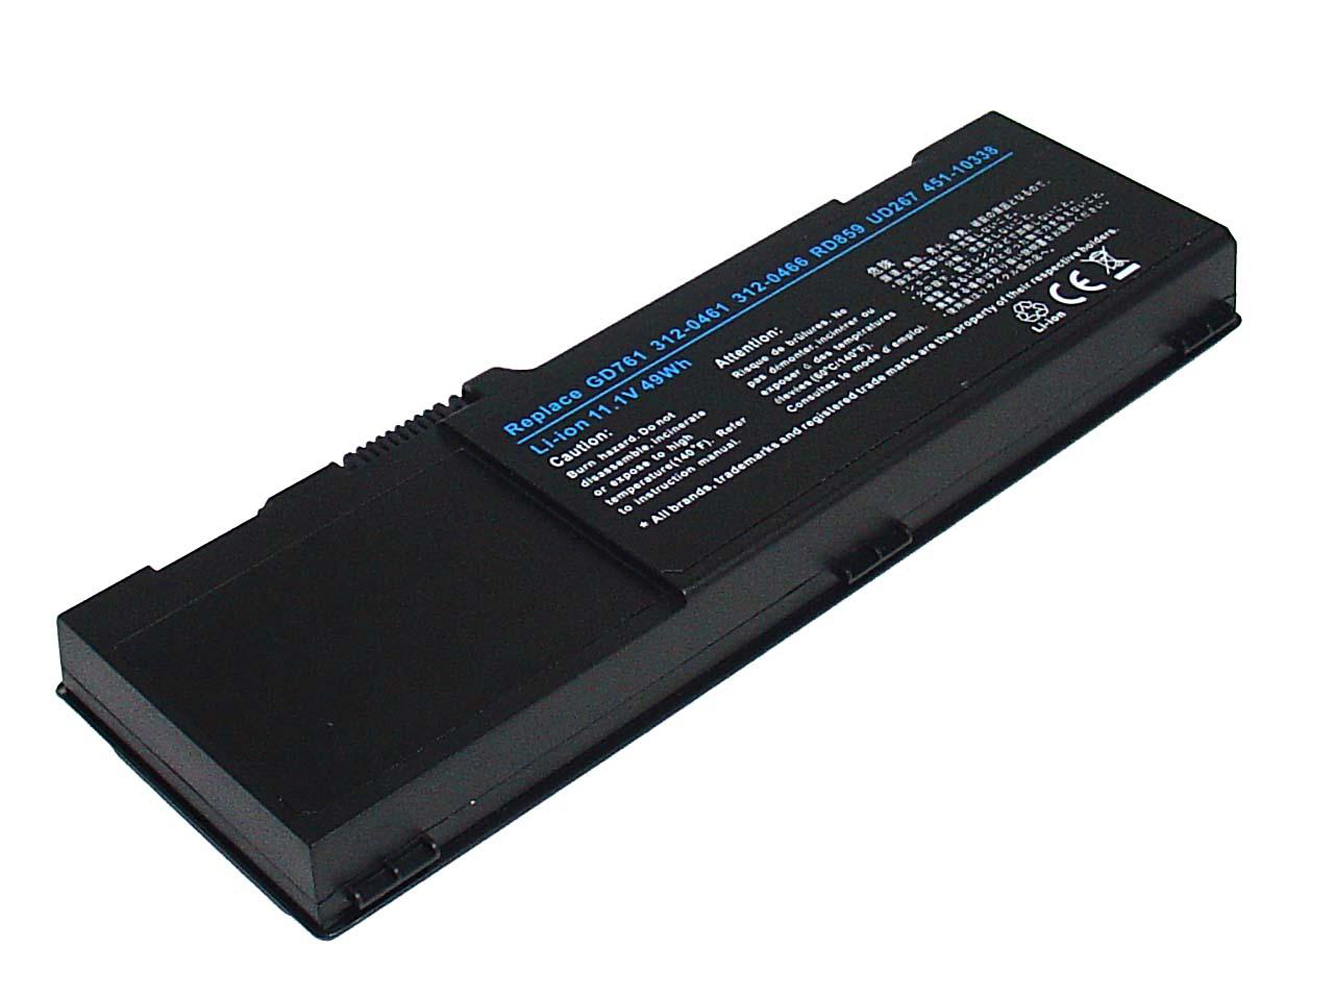 312-0461, 312-0466 replacement Laptop Battery for Dell Inspiron 1501, Inspiron 6400, 4400mAh, 11.10V